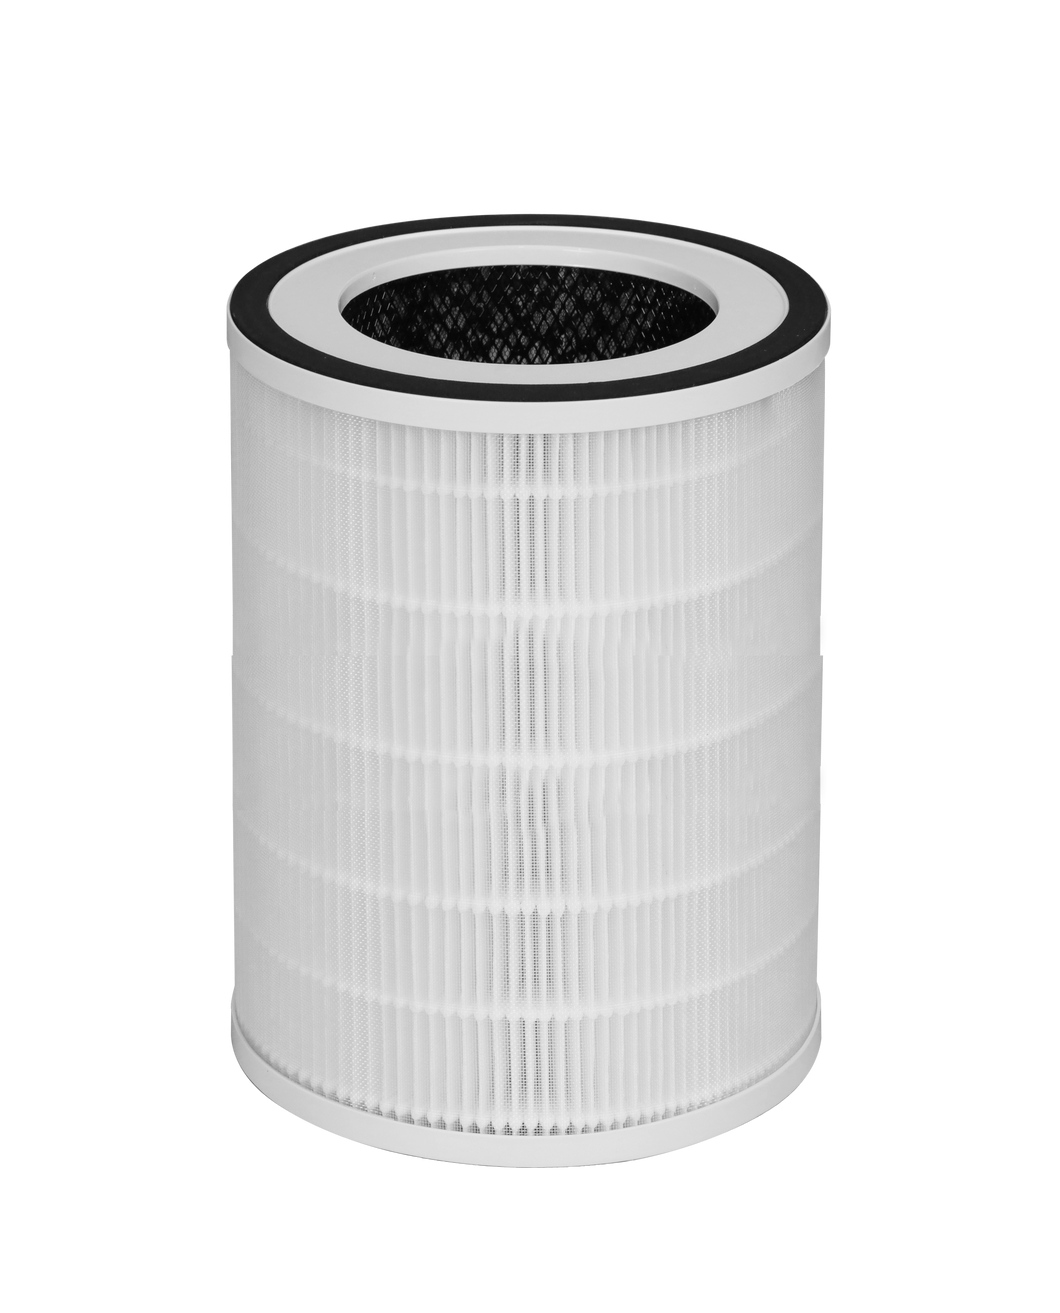 Replacement filter for Miro PRO air purifier